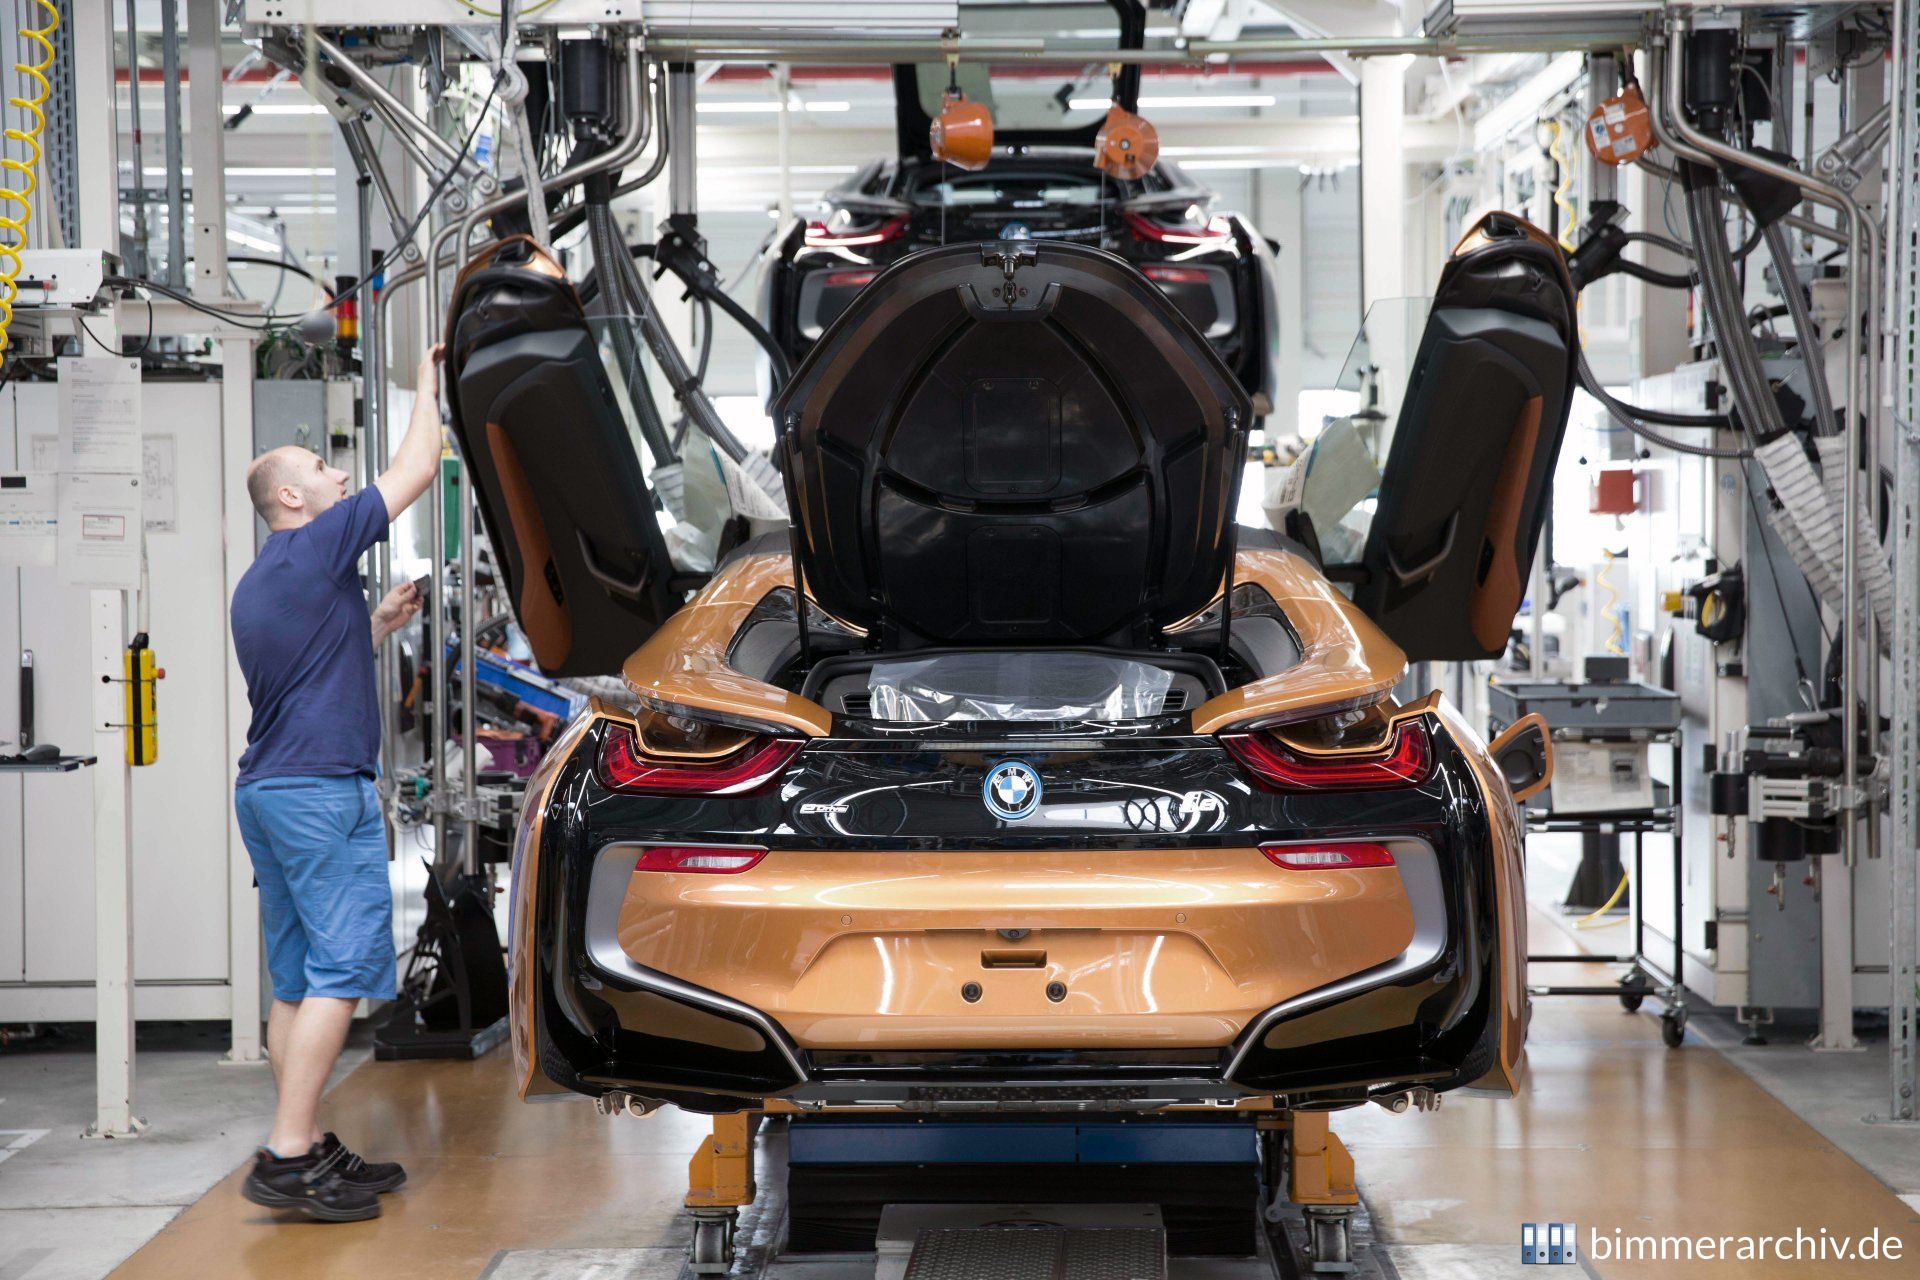 Production BMW i8 Roadster in the BMW Group Plant Leipzig